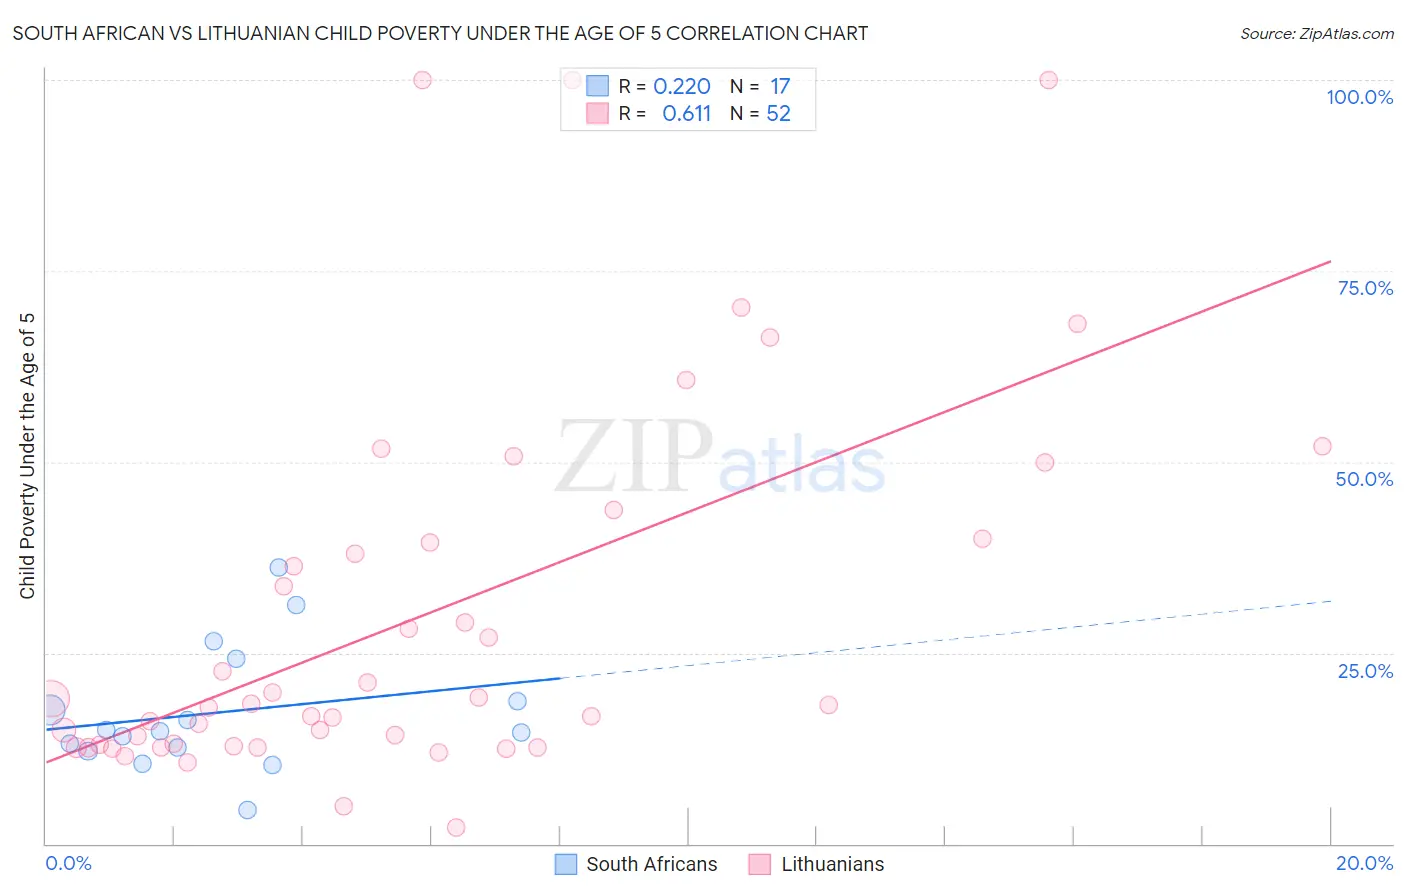 South African vs Lithuanian Child Poverty Under the Age of 5